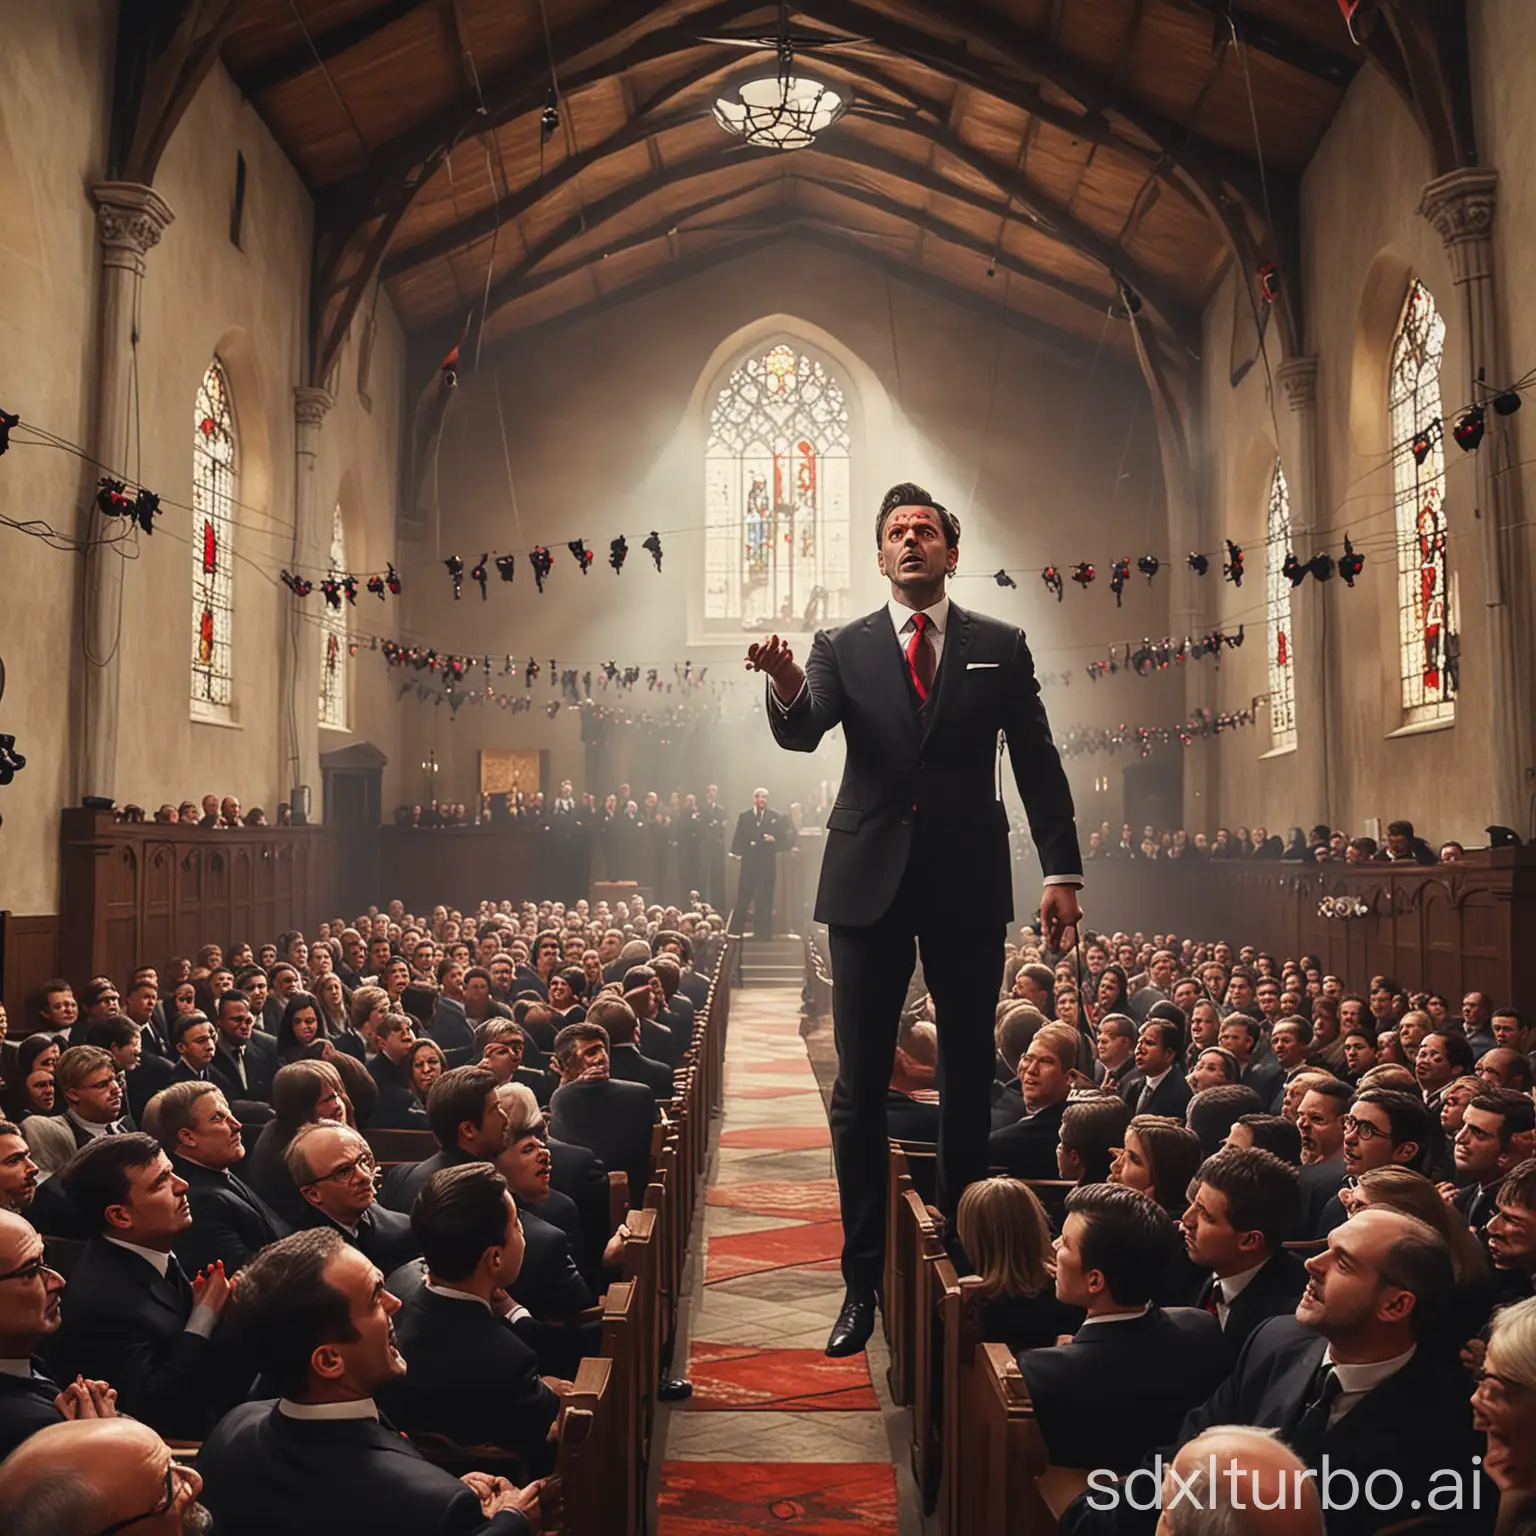 An evil man in a suit talking to a multitude of people inside a church. He has red evil eyes. In the ceiling there are hands pulling marionette strings towards the people